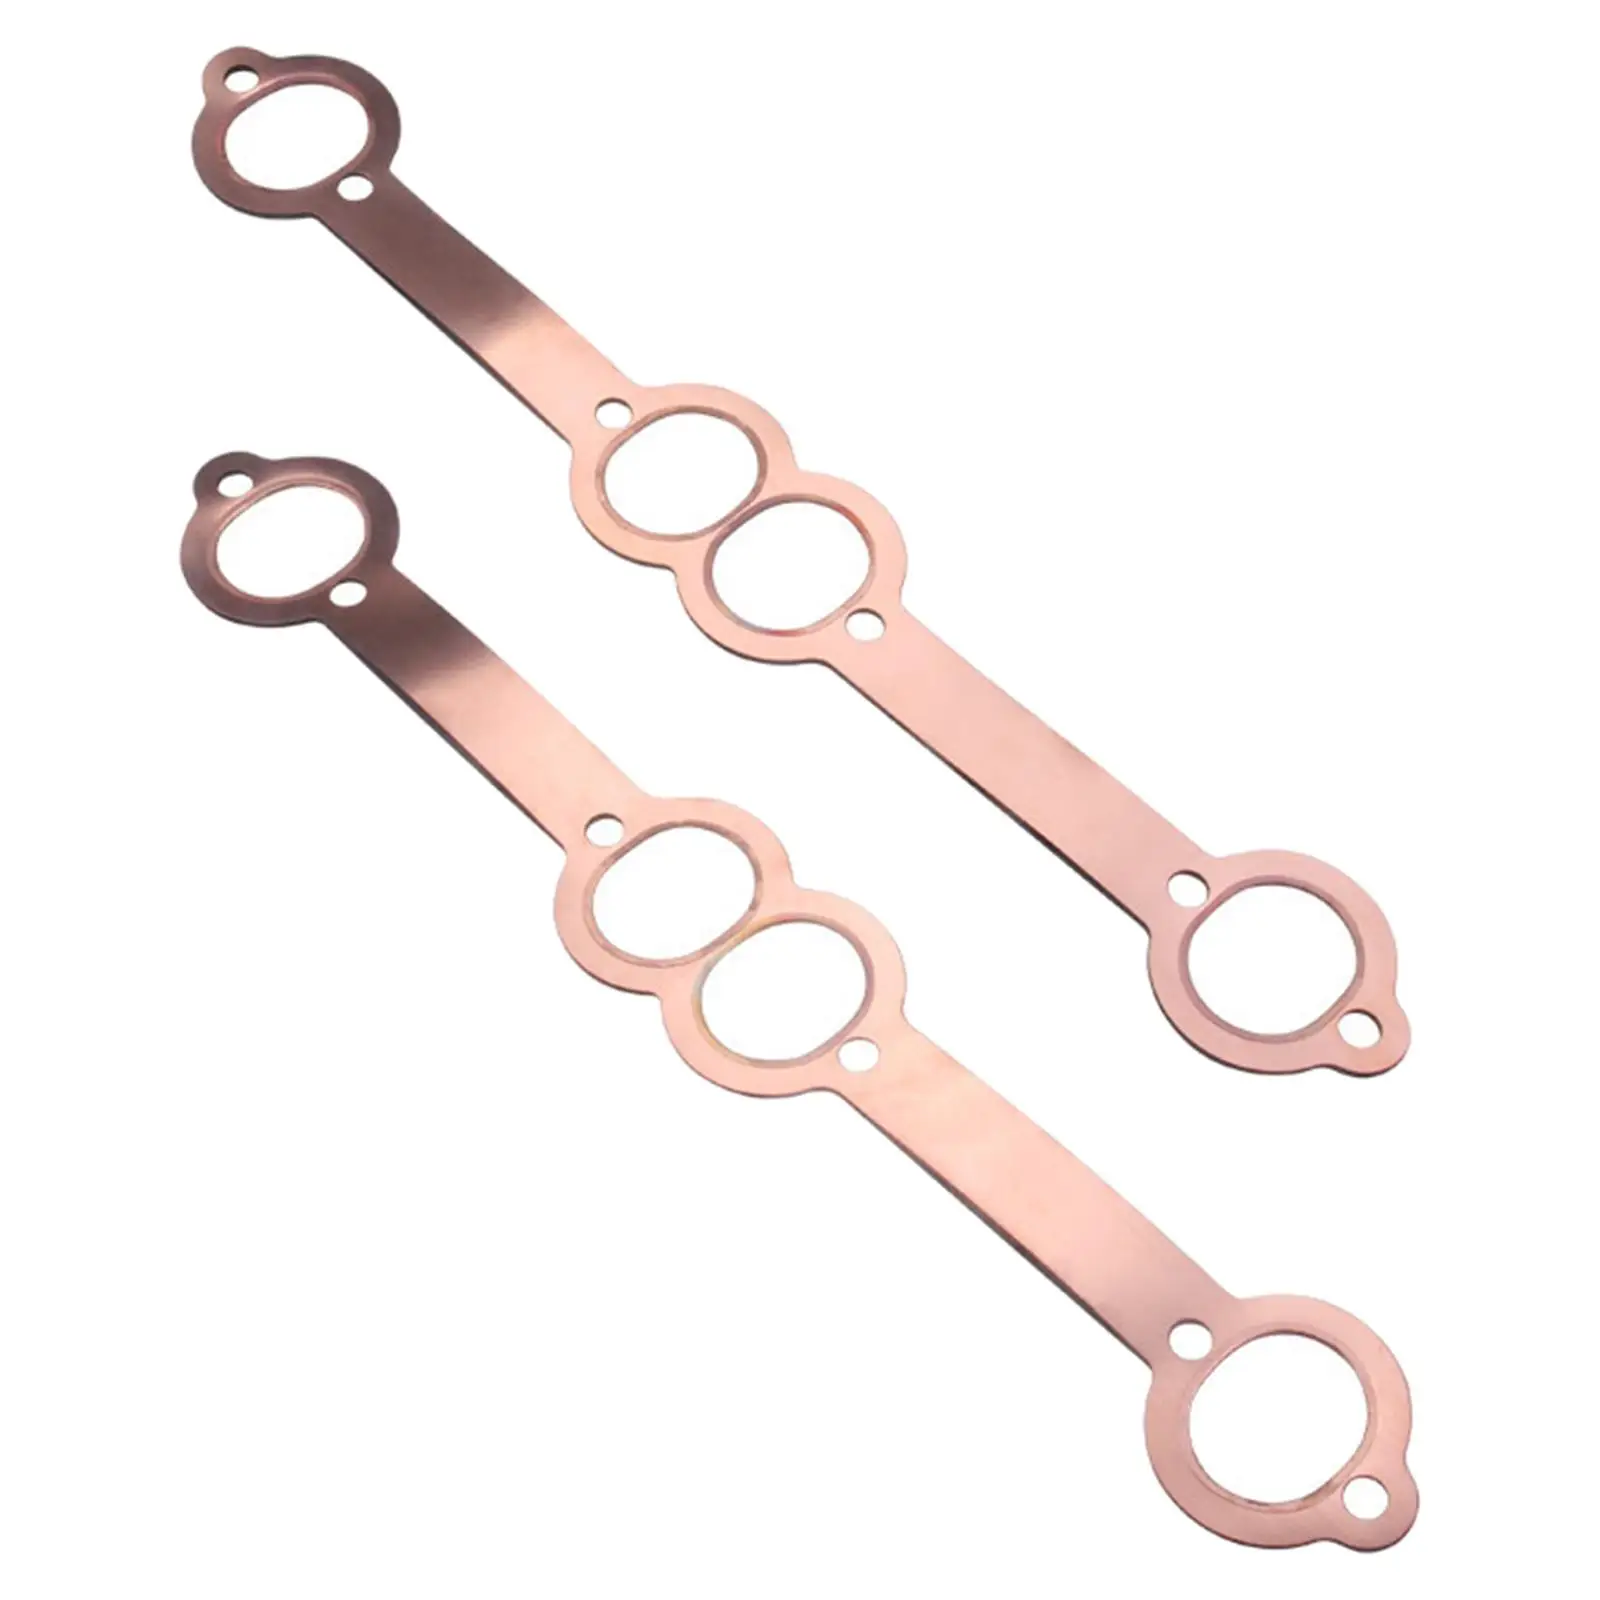 2 Pieces Car Oval Port Sbc Copper Header Exhaust Gaskets, Reusable for SB 350 327 283 383 400